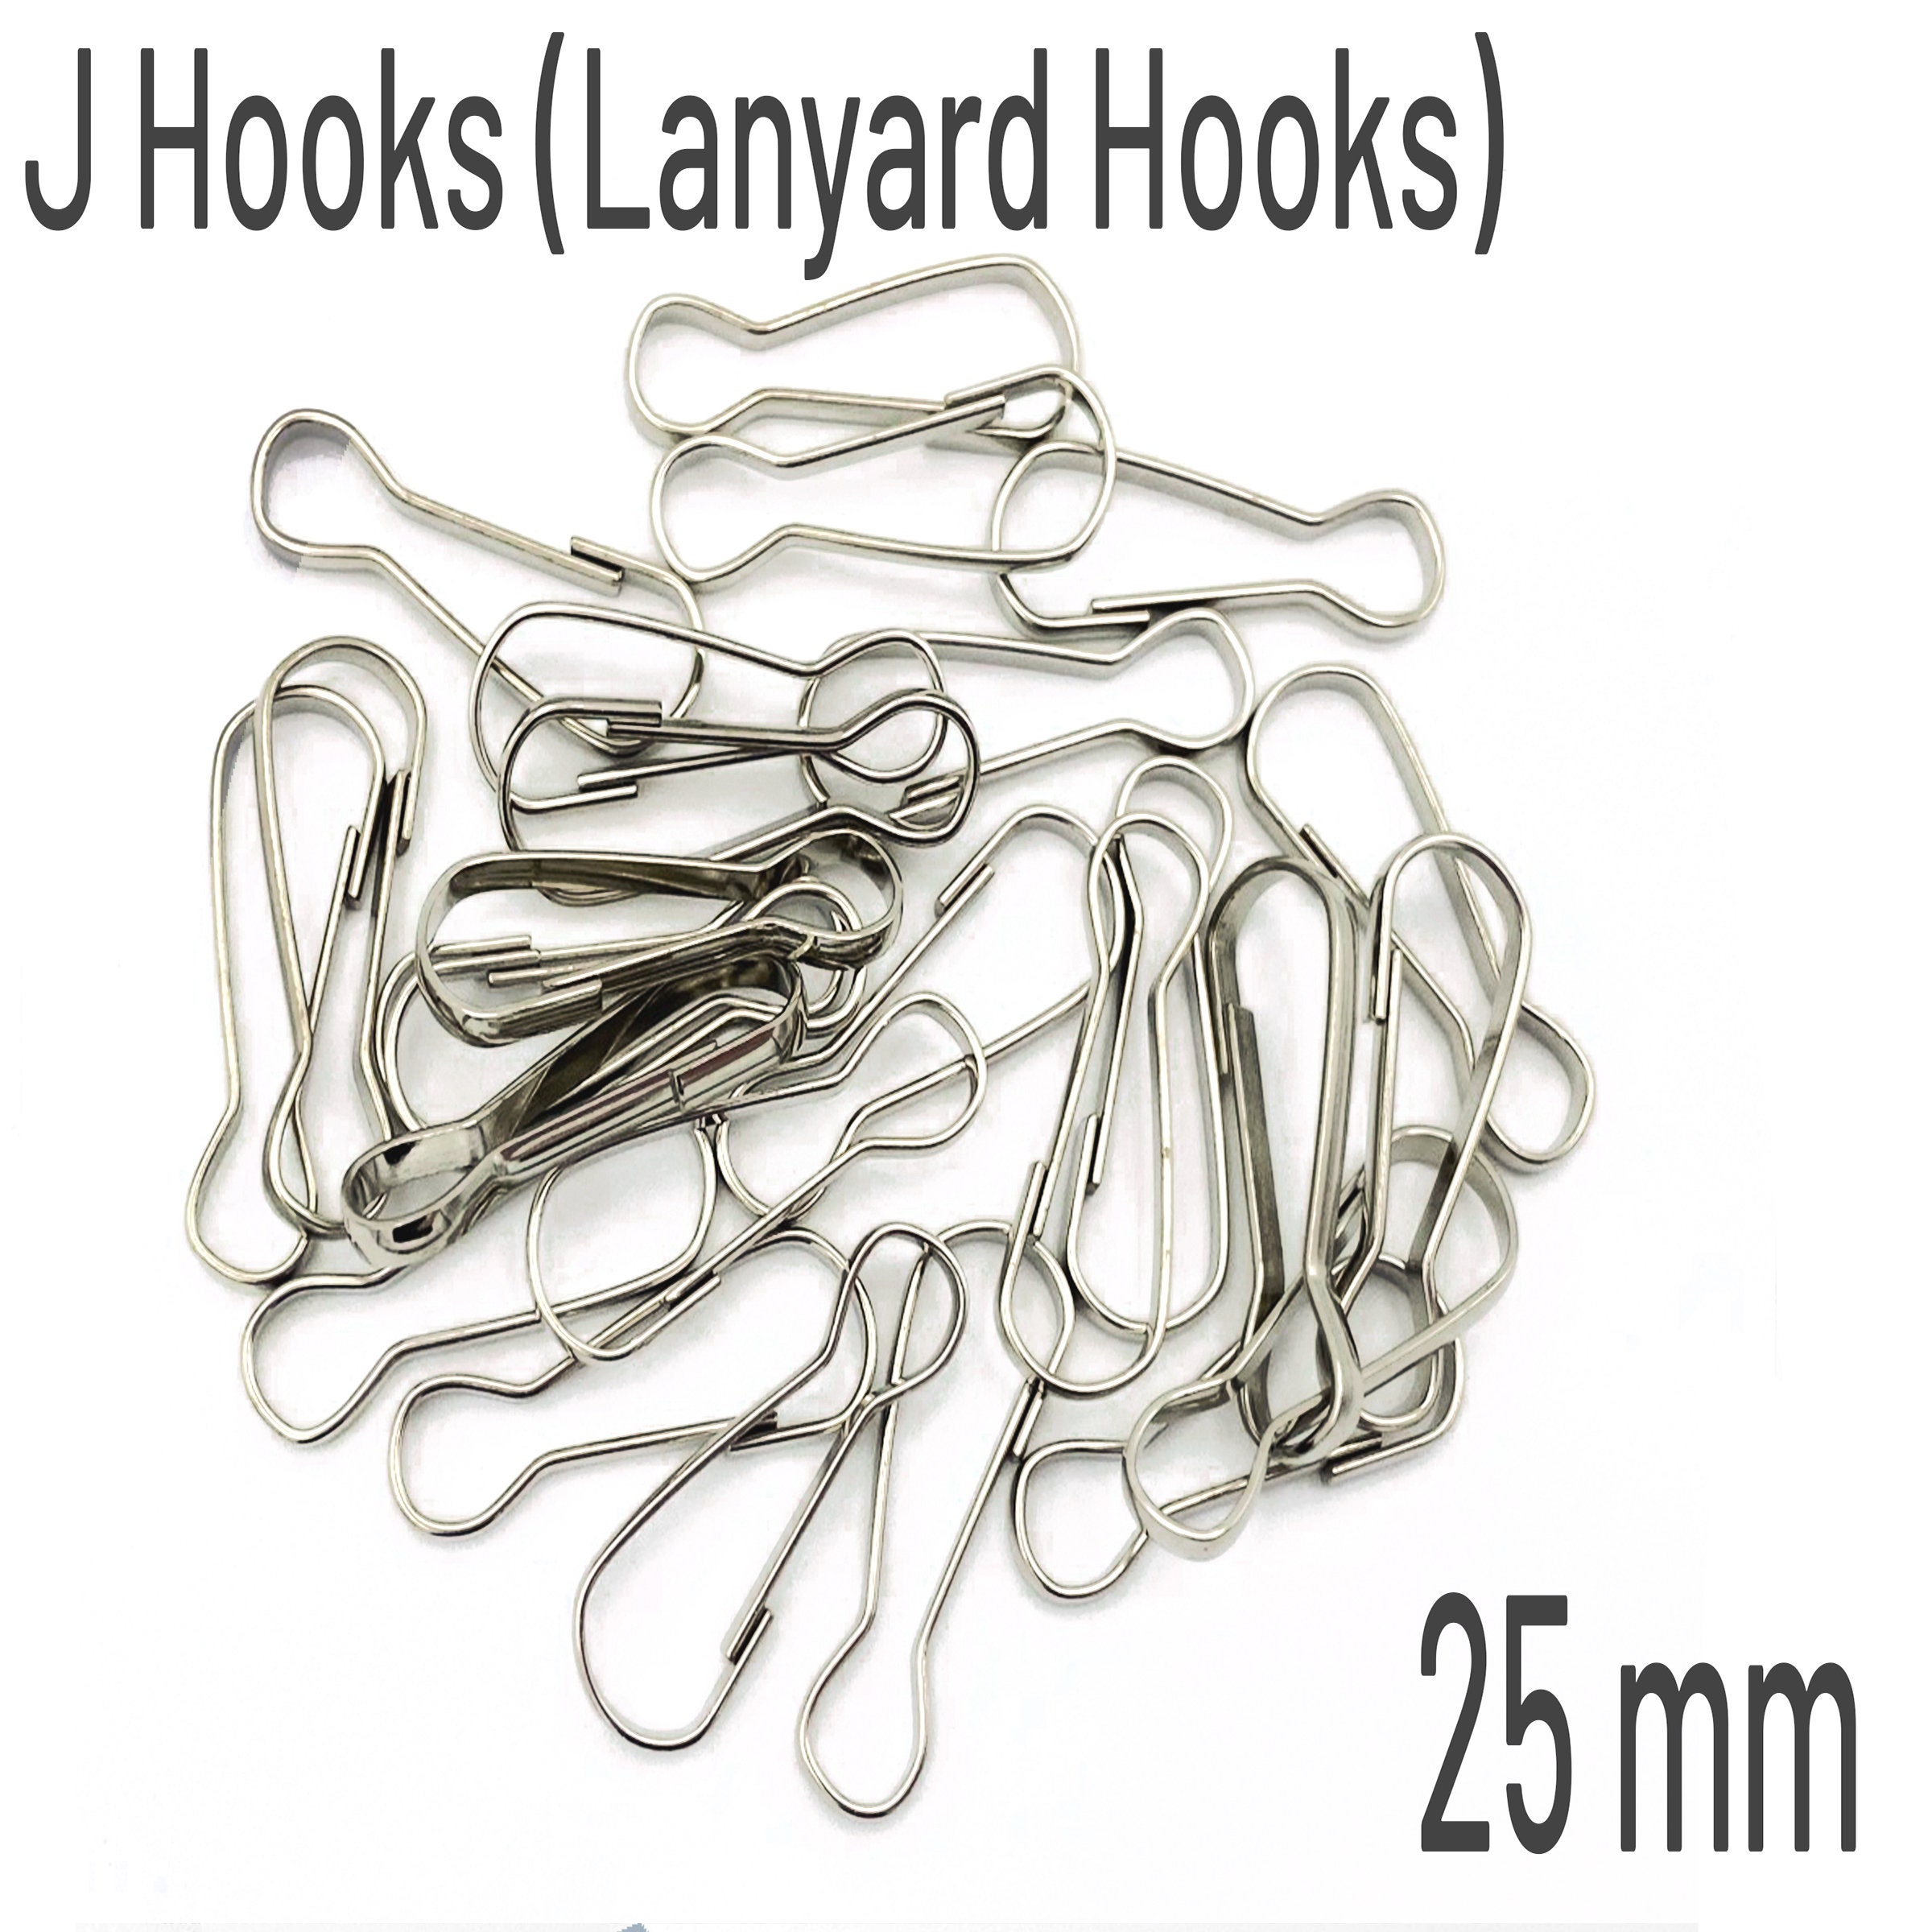 Large Lanyard Clips, 32mm X 11mm 50 Clips, DIY Crafts, Beading Supplies, Lanyard  Hooks, Zipper Pulls, Jewelry and Beading Supplies, SALE 